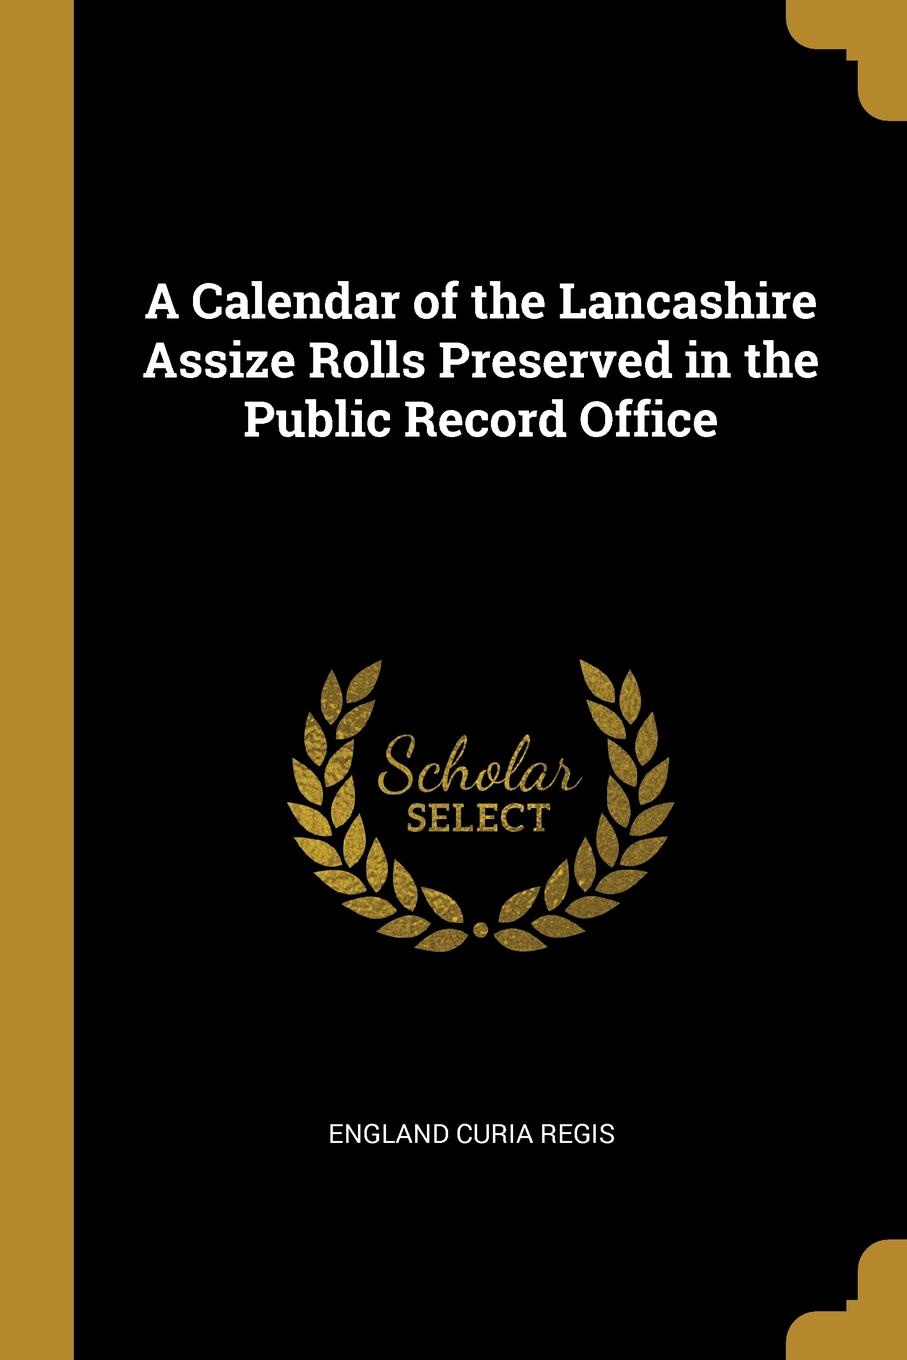 A Calendar of the Lancashire Assize Rolls Preserved in the Public Record Office